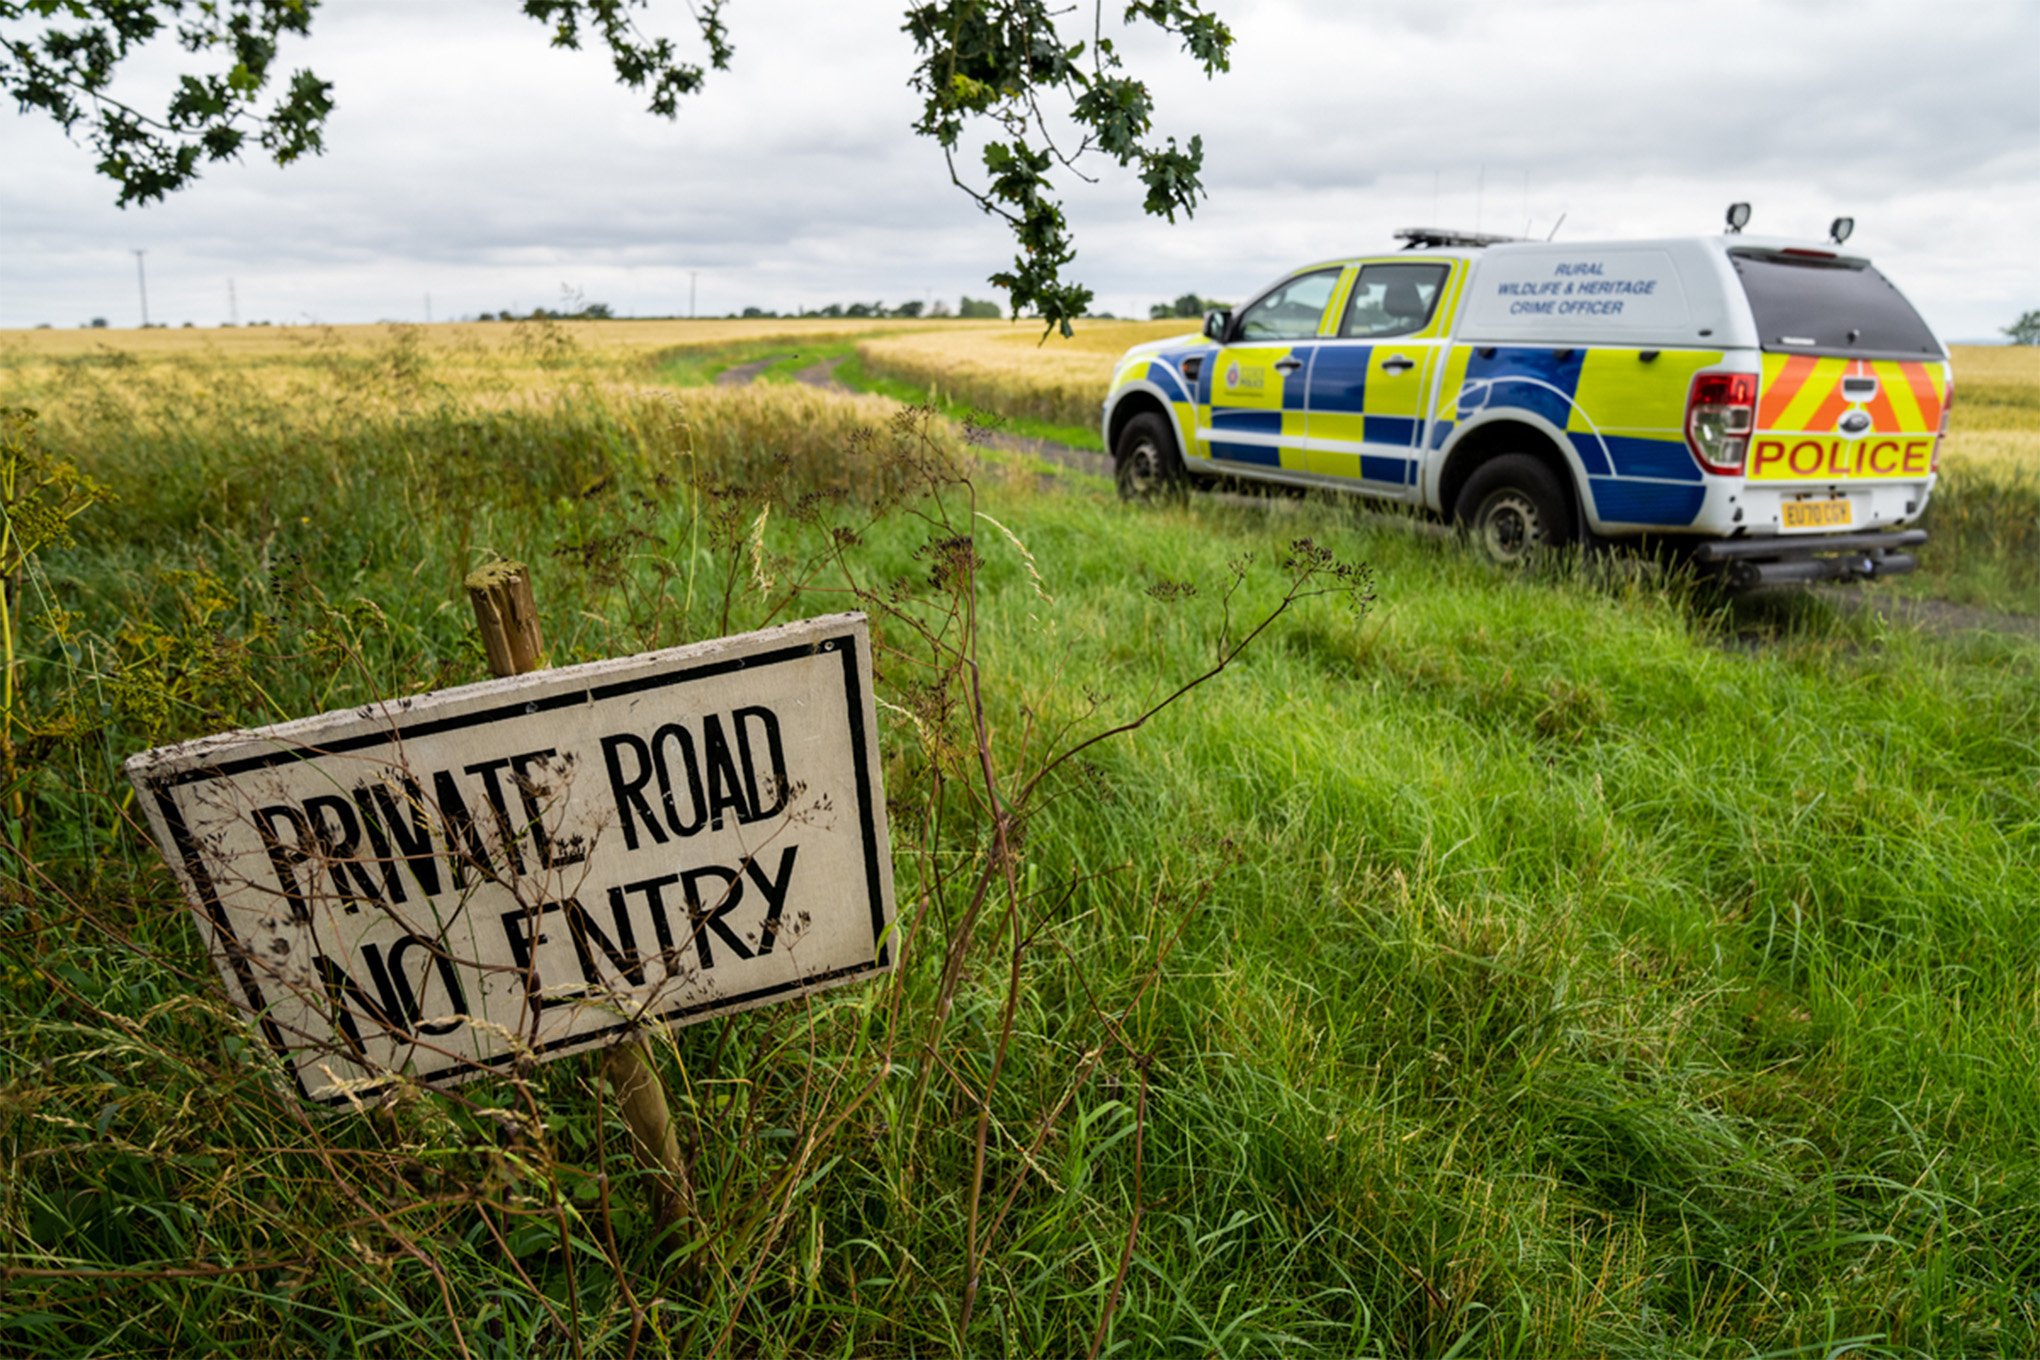 A photograph of a police SUV parked in a field. A sign in the foreground reads "Private Road / No entry"